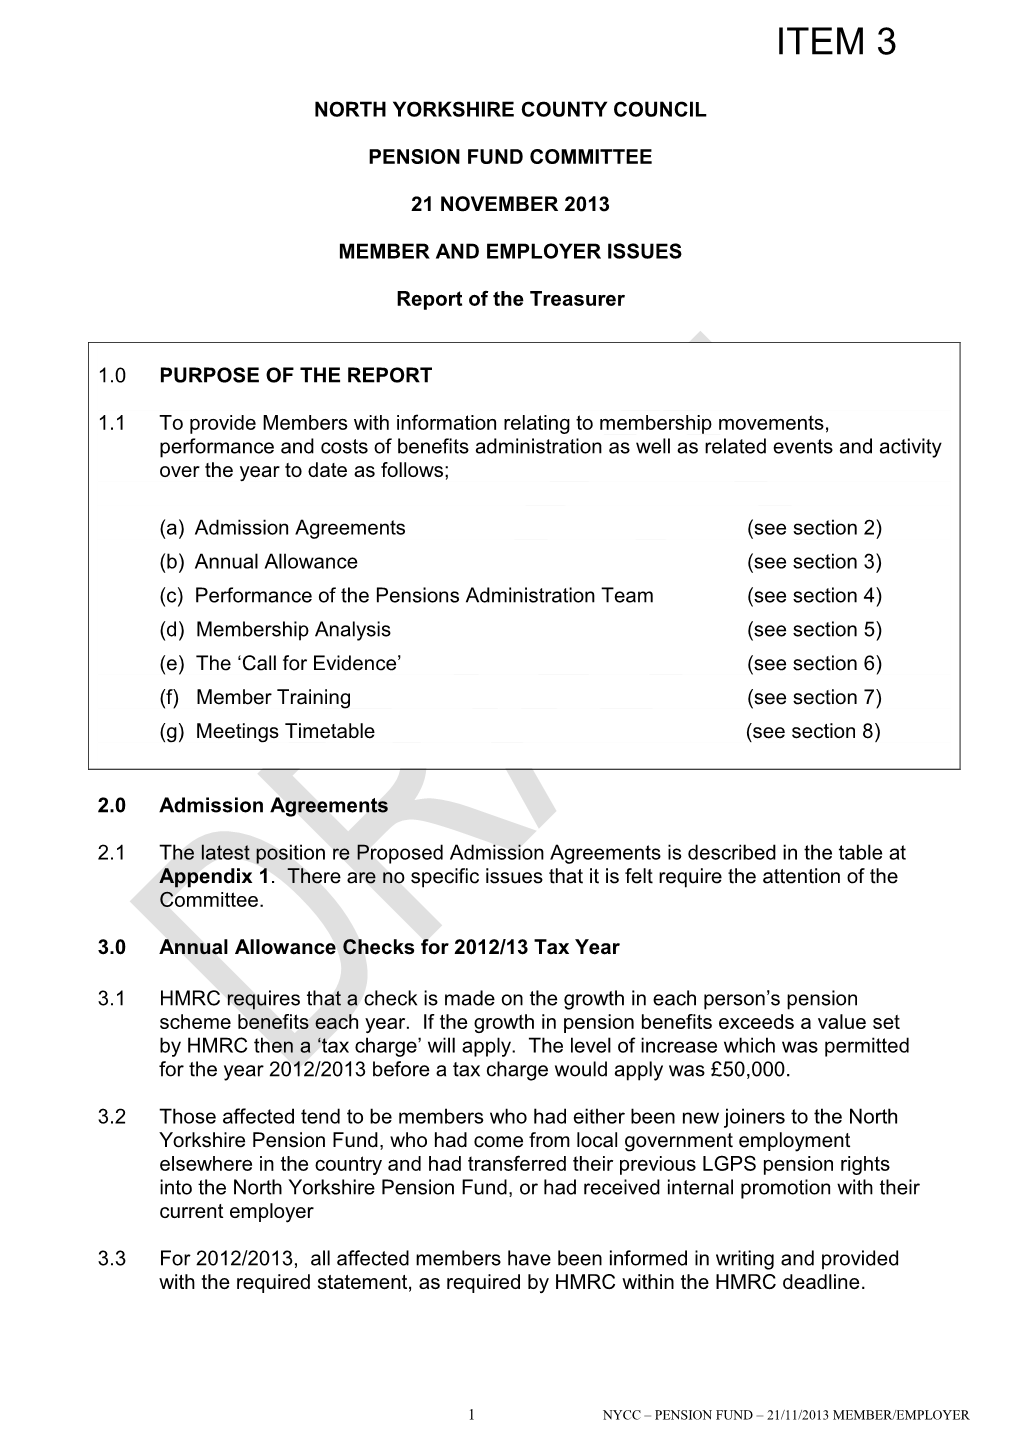 03 Member and Employer Issues.Pdf